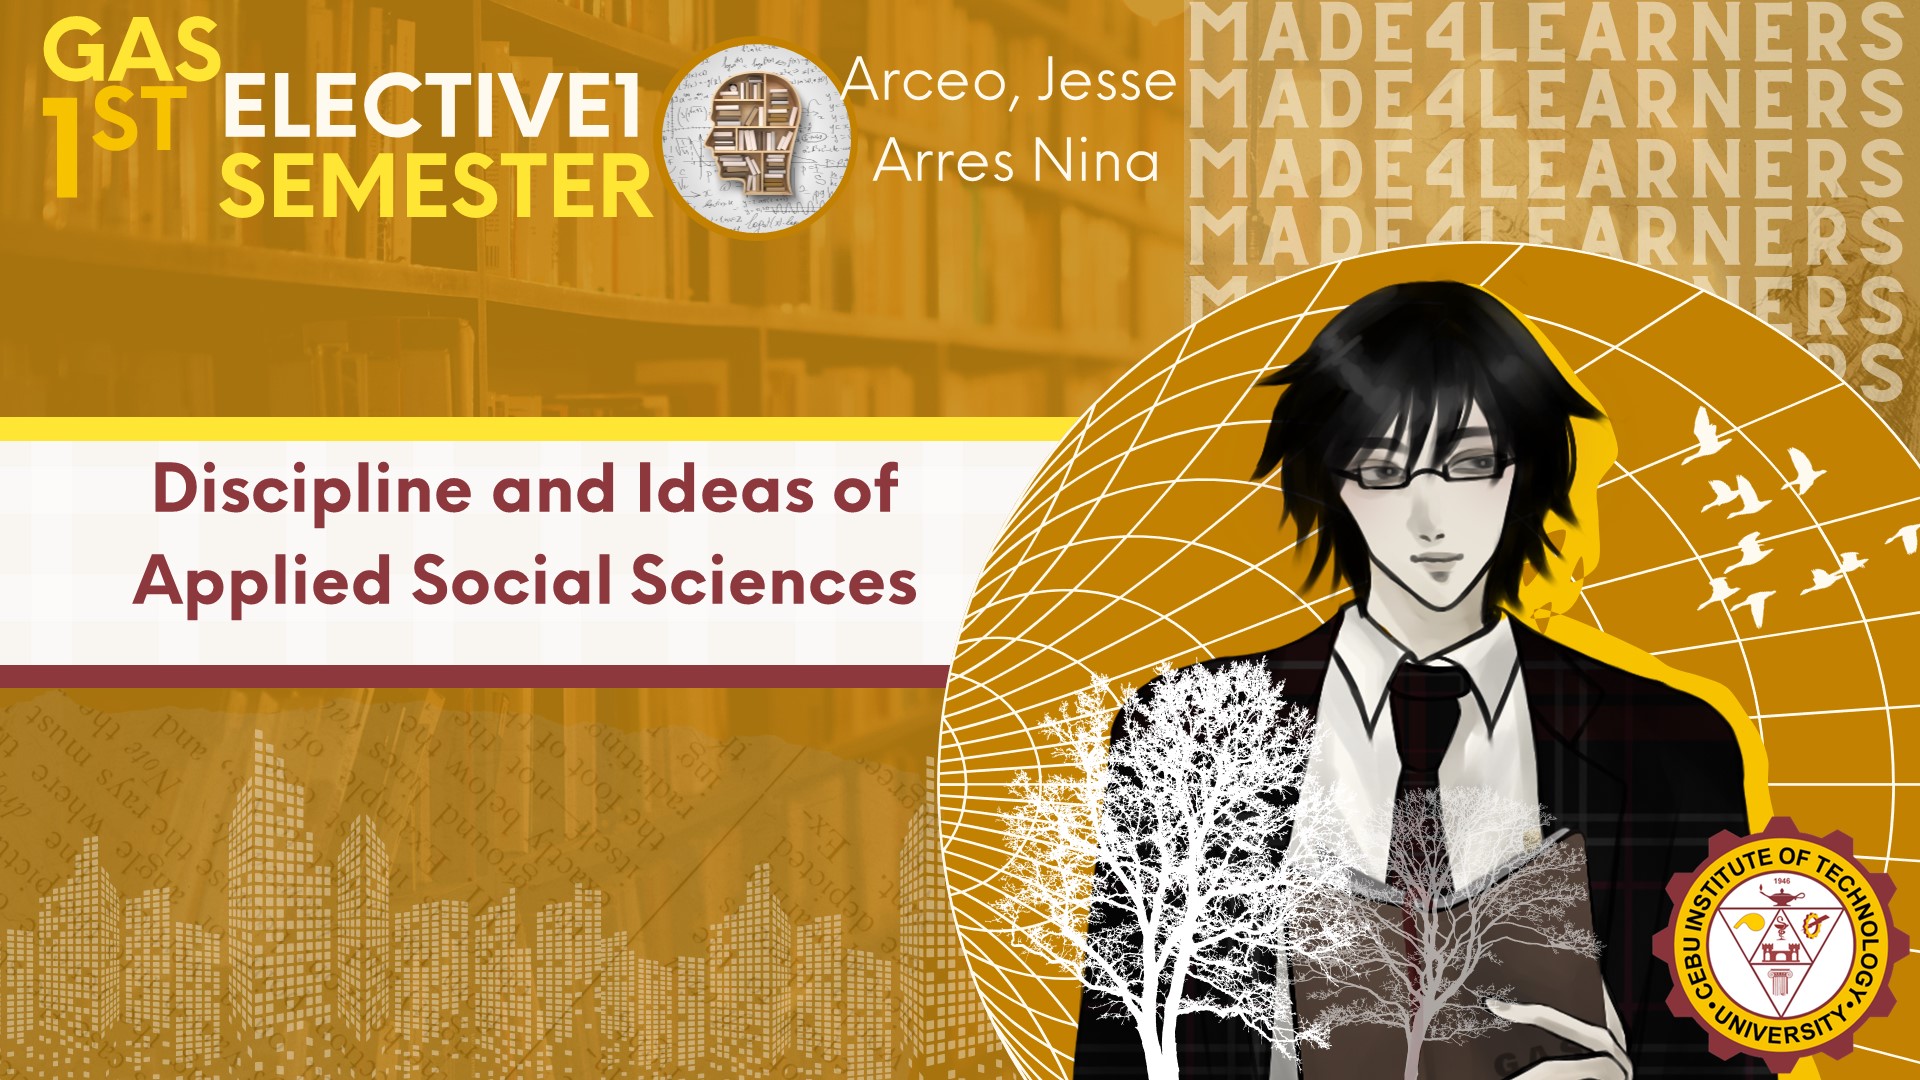 ELEC1: Discipline and Ideas of Applied Social Science (Arceo)